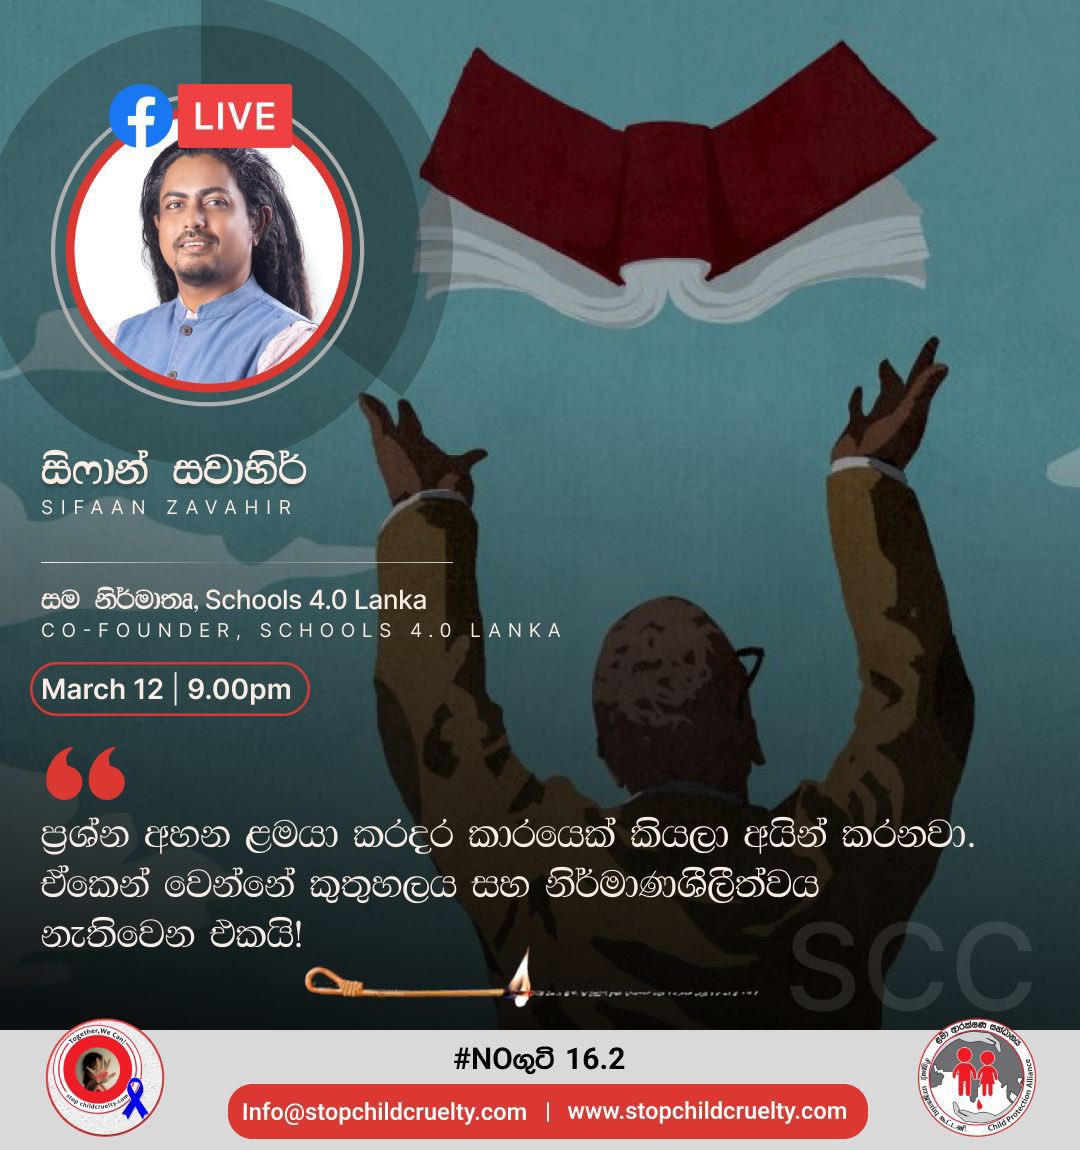 Sifaan, one of the co-founders of Schools 4.0 Lanka and Kinder Republic, will be sharing some thoughts on “Free” education at 9 pm tonight at facebook.com/stopchildcruel…